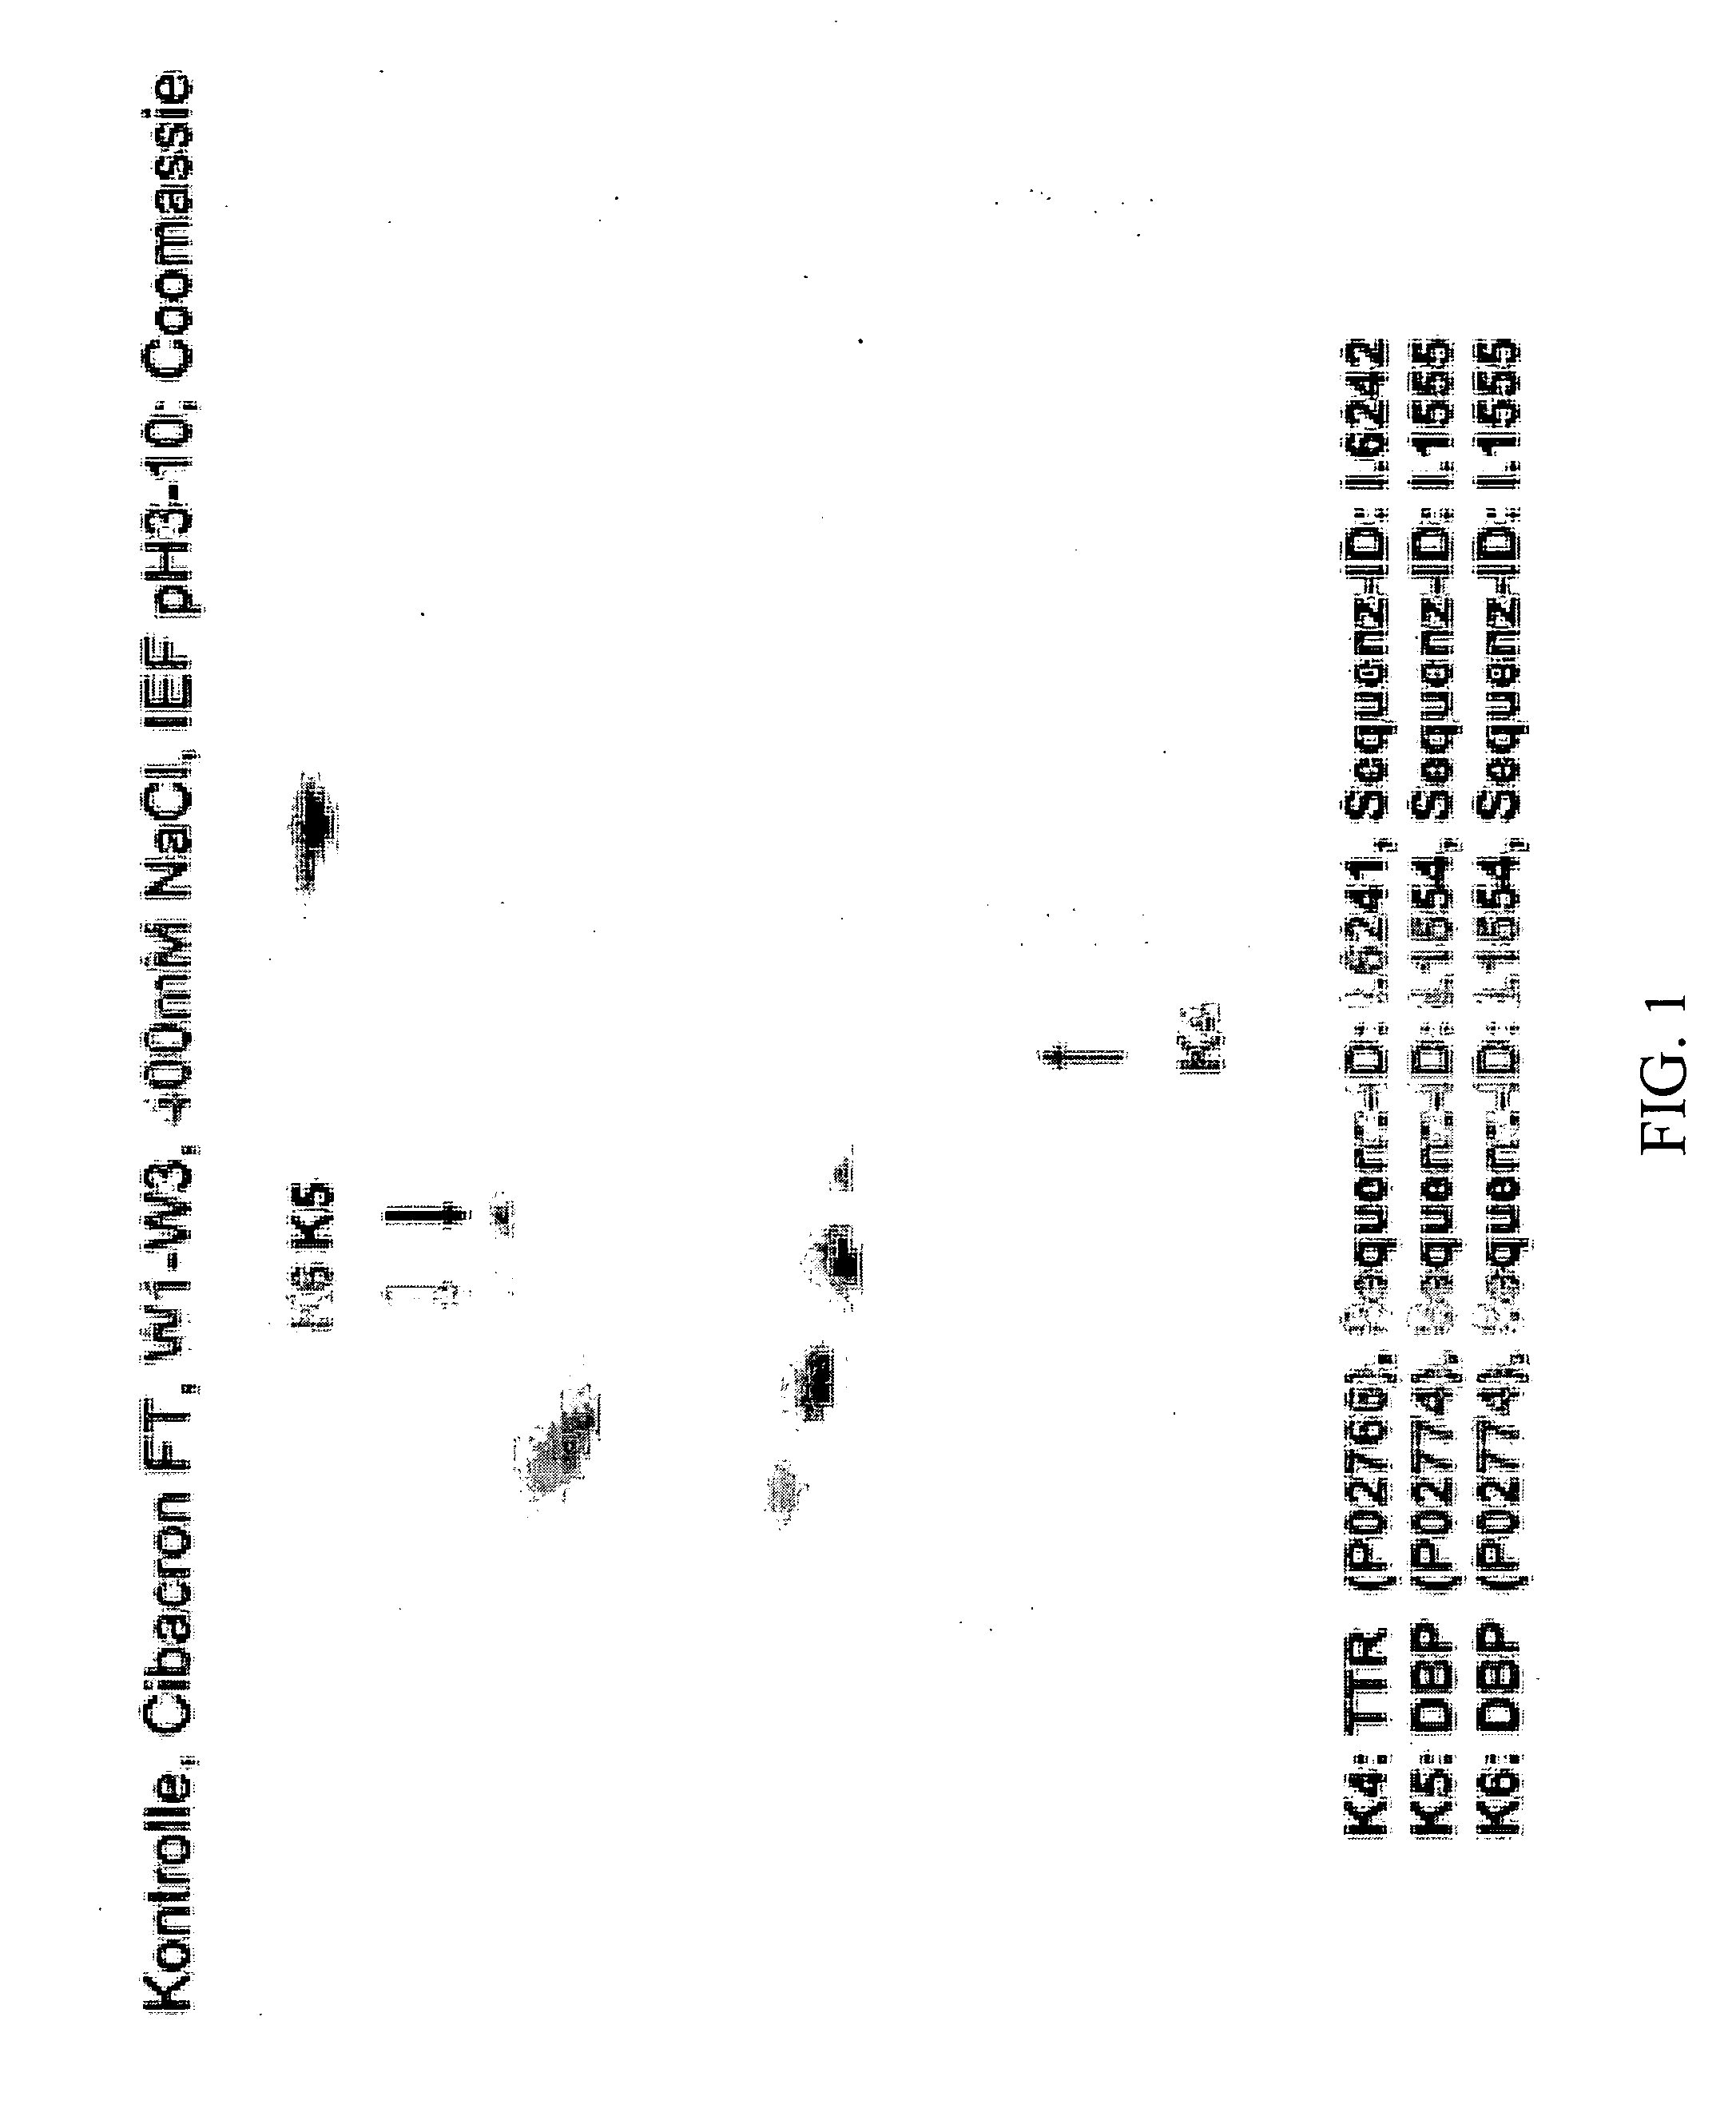 Method for Recognizing Acute Generalized Inflammatory Conditions (Sirs), Sepsis, Sepsis-Like Conditions and Systemic Infections